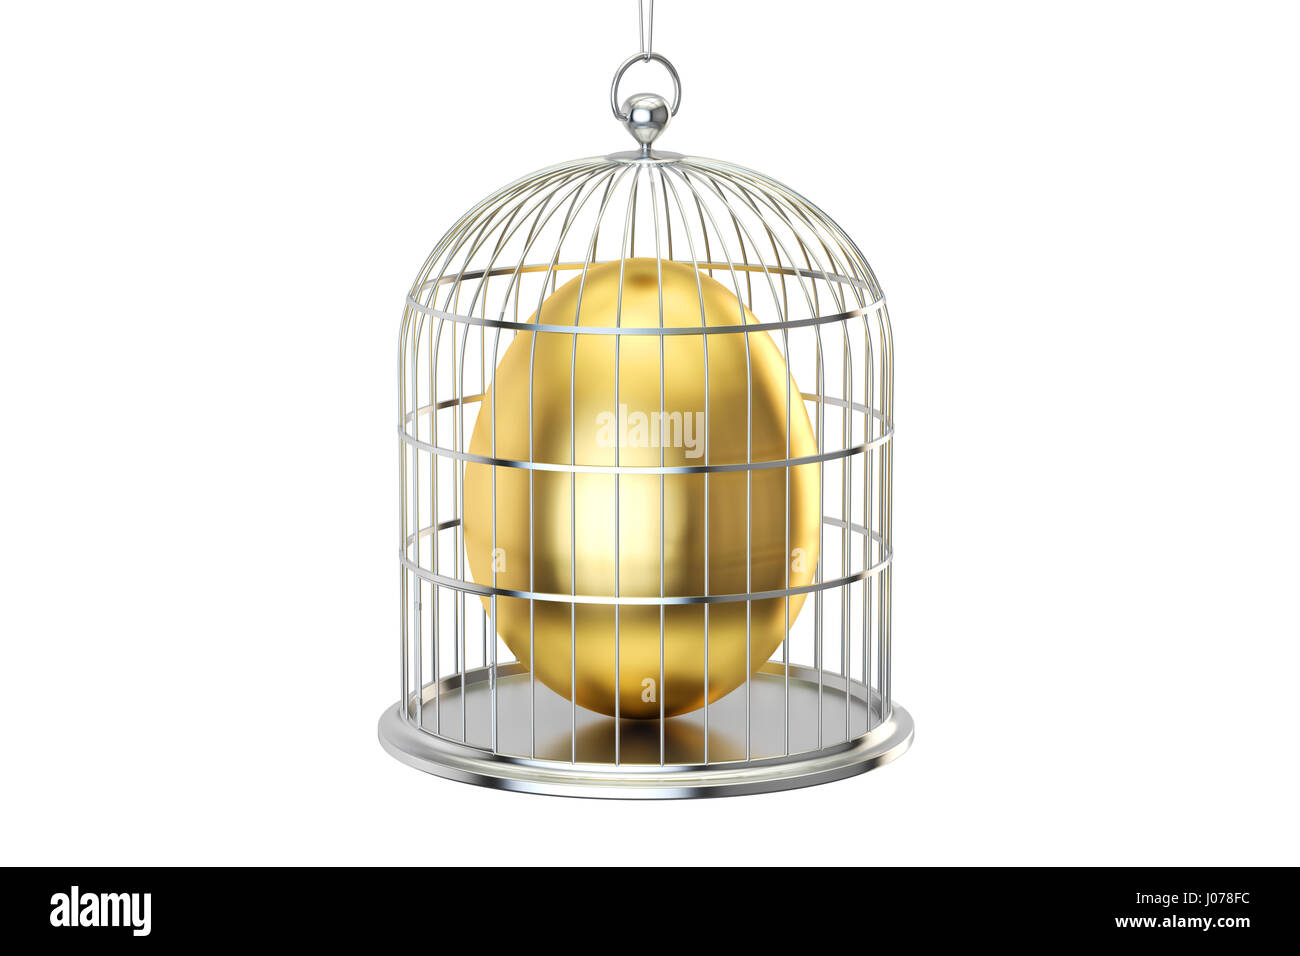 Birdcage with golden egg inside, 3D rendering isolated on white background Stock Photo